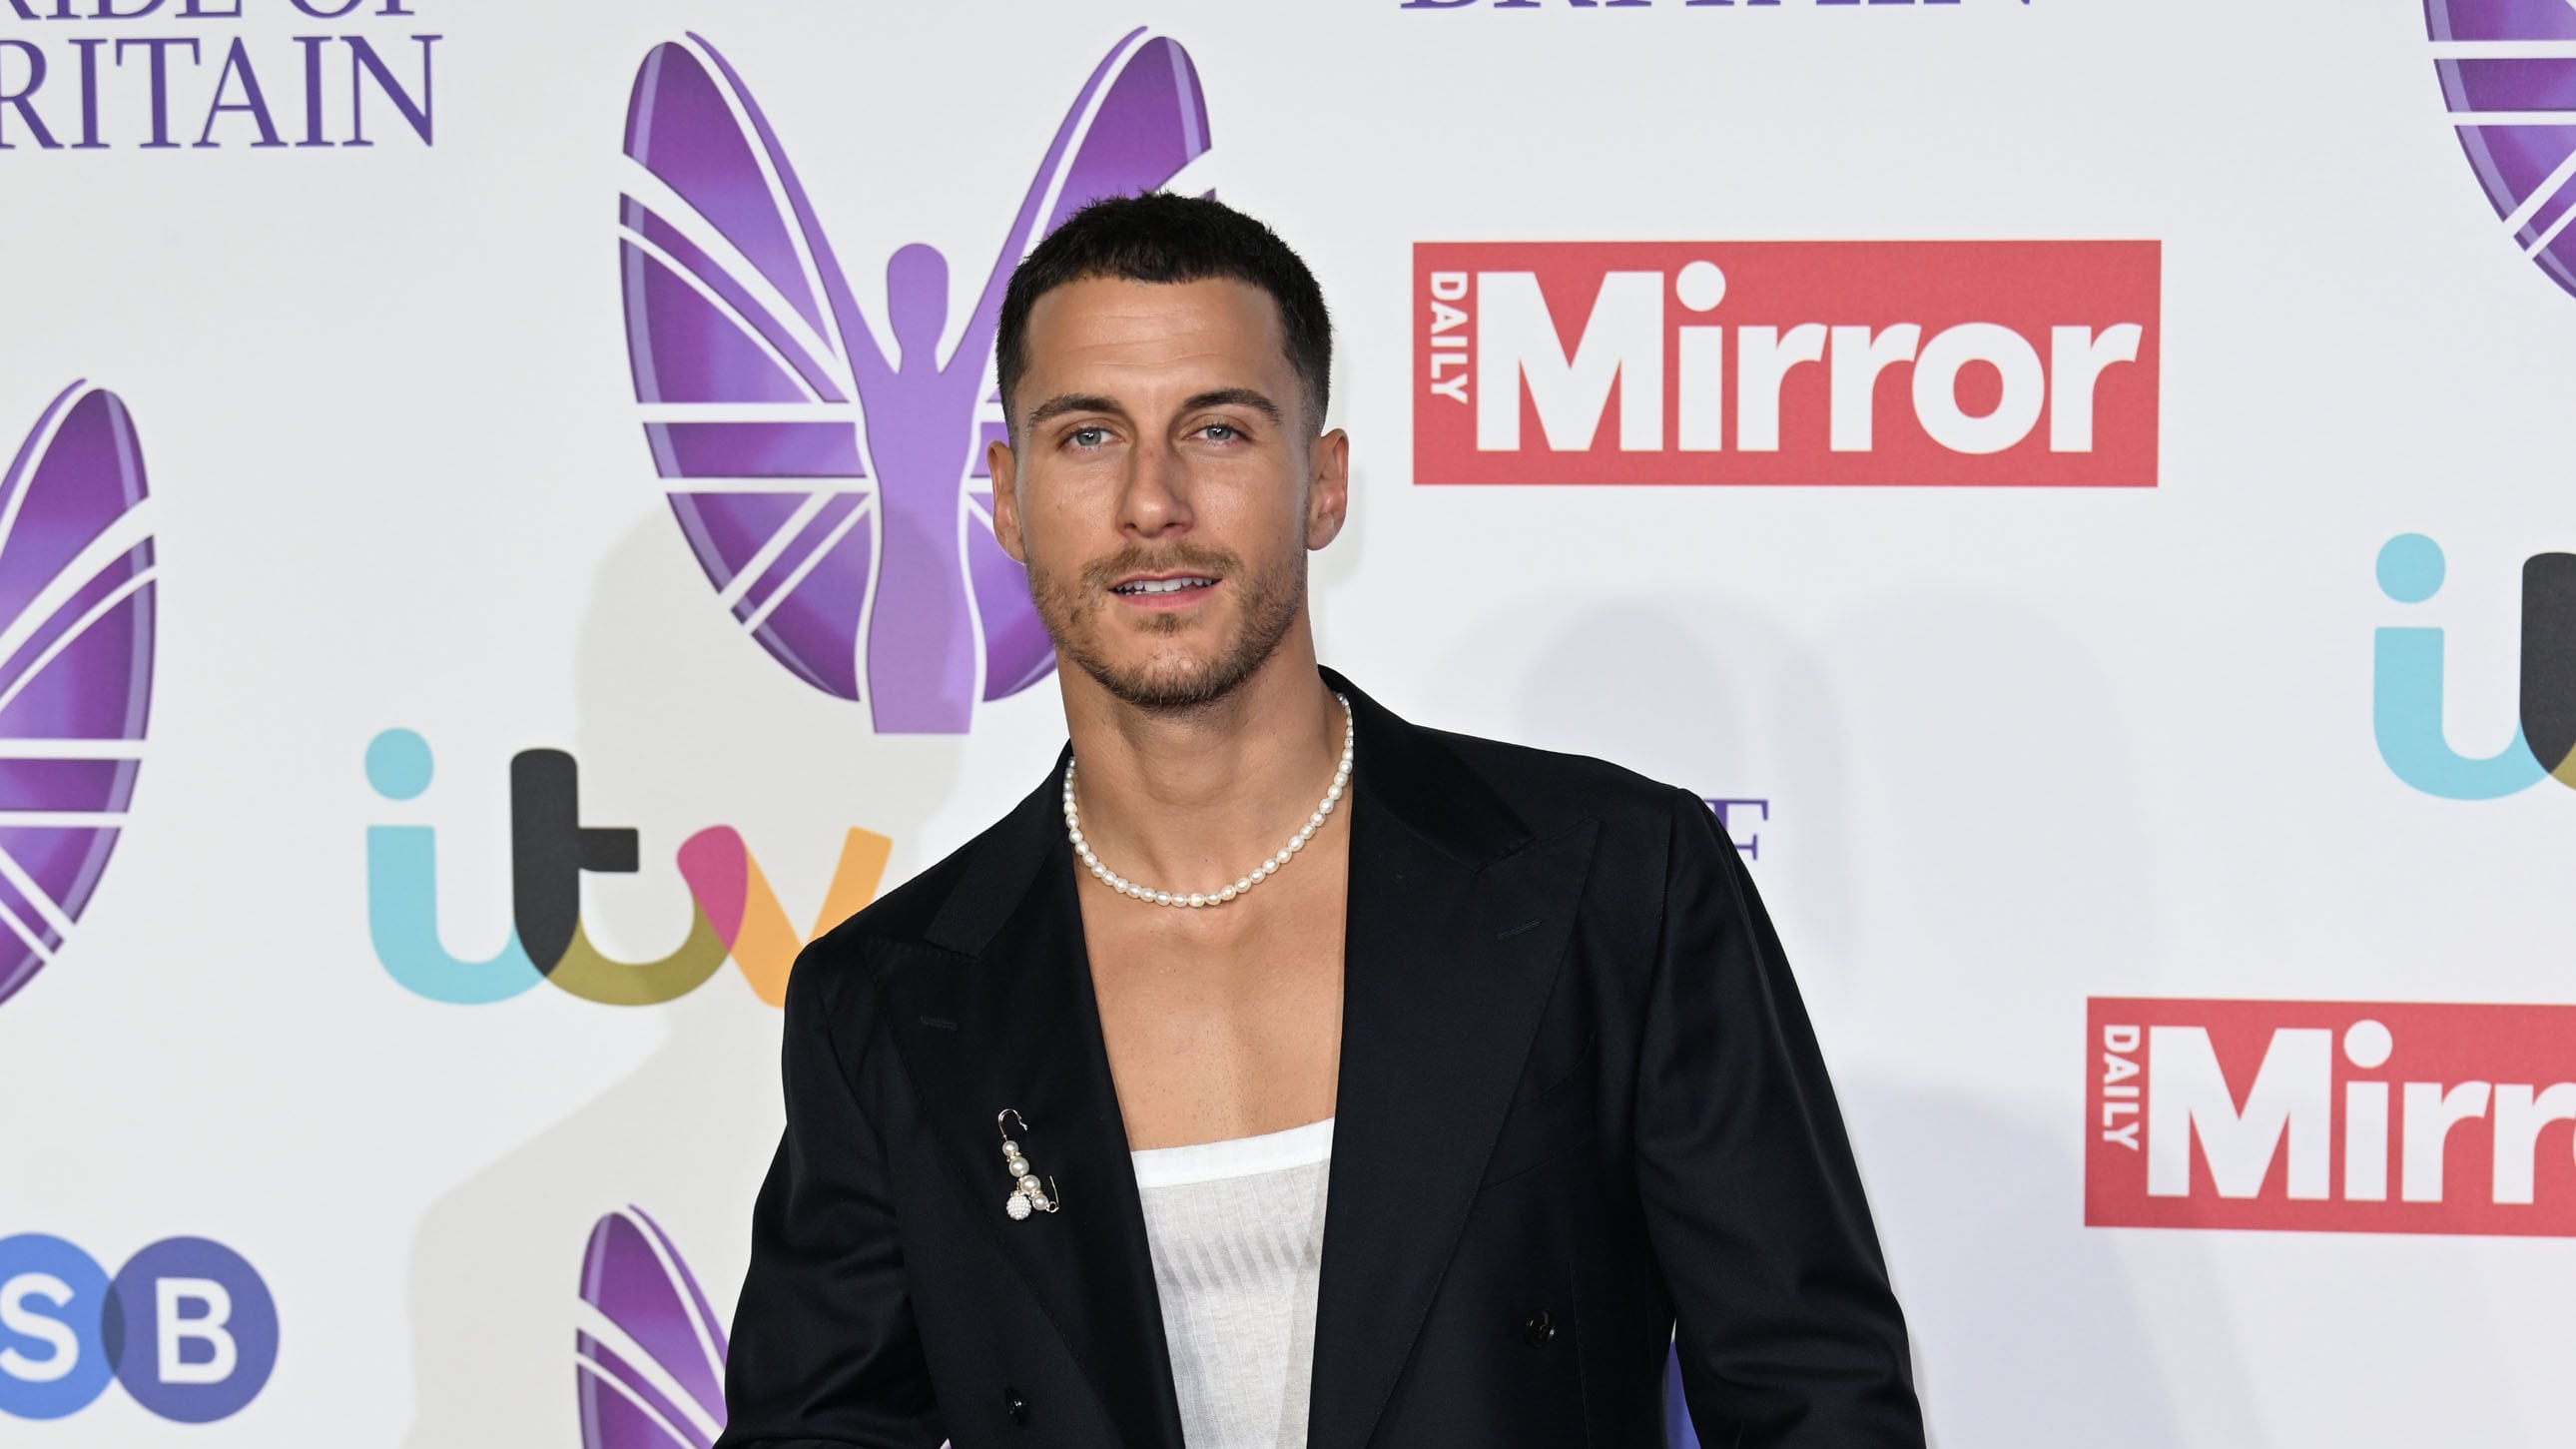 Gorka Marquez is now the longest serving male professional dancer in the line-up